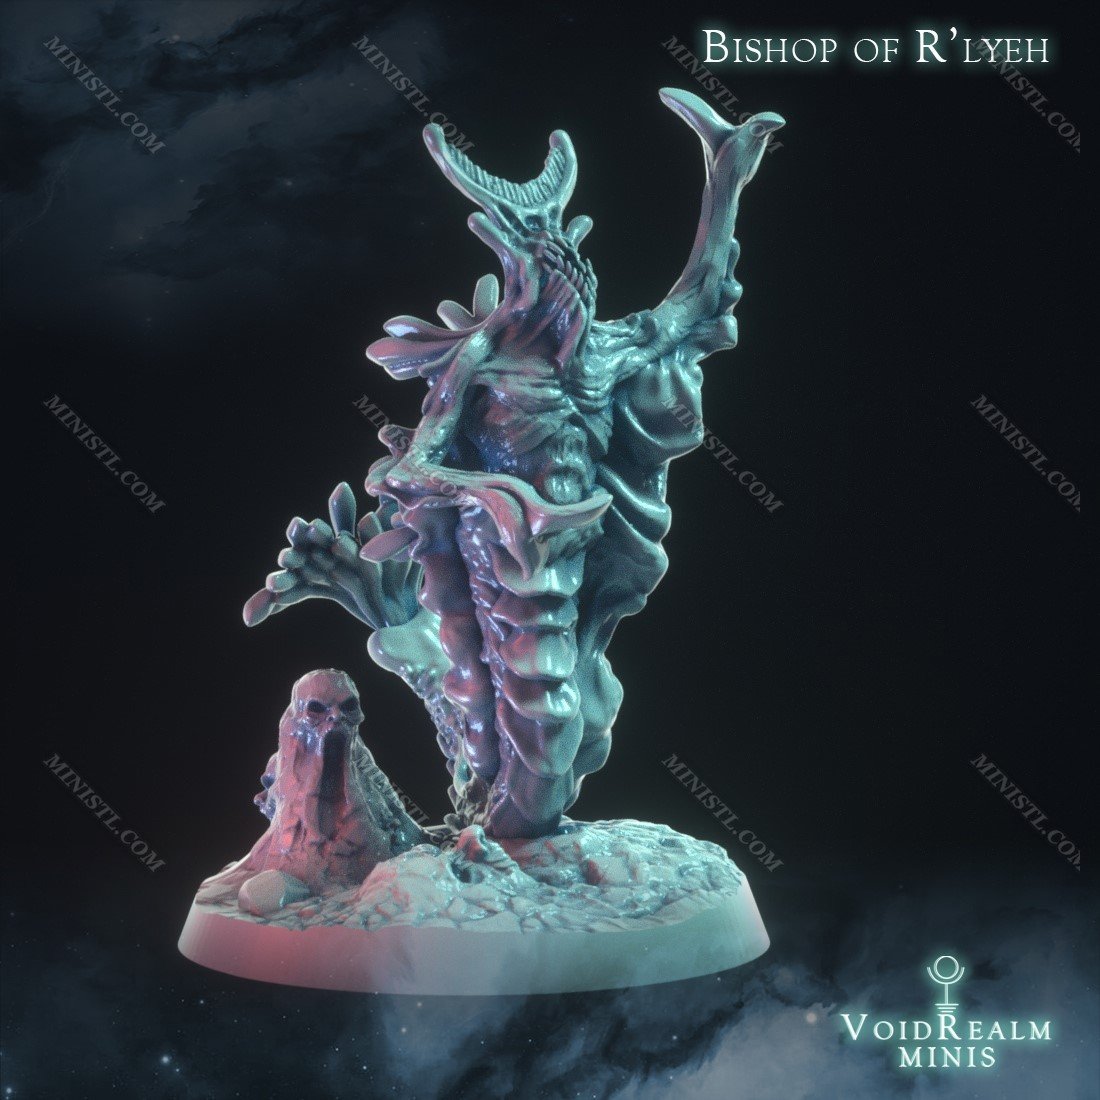 VoidRealm Minis May 2022 Void Realm Patreon  MINISTL